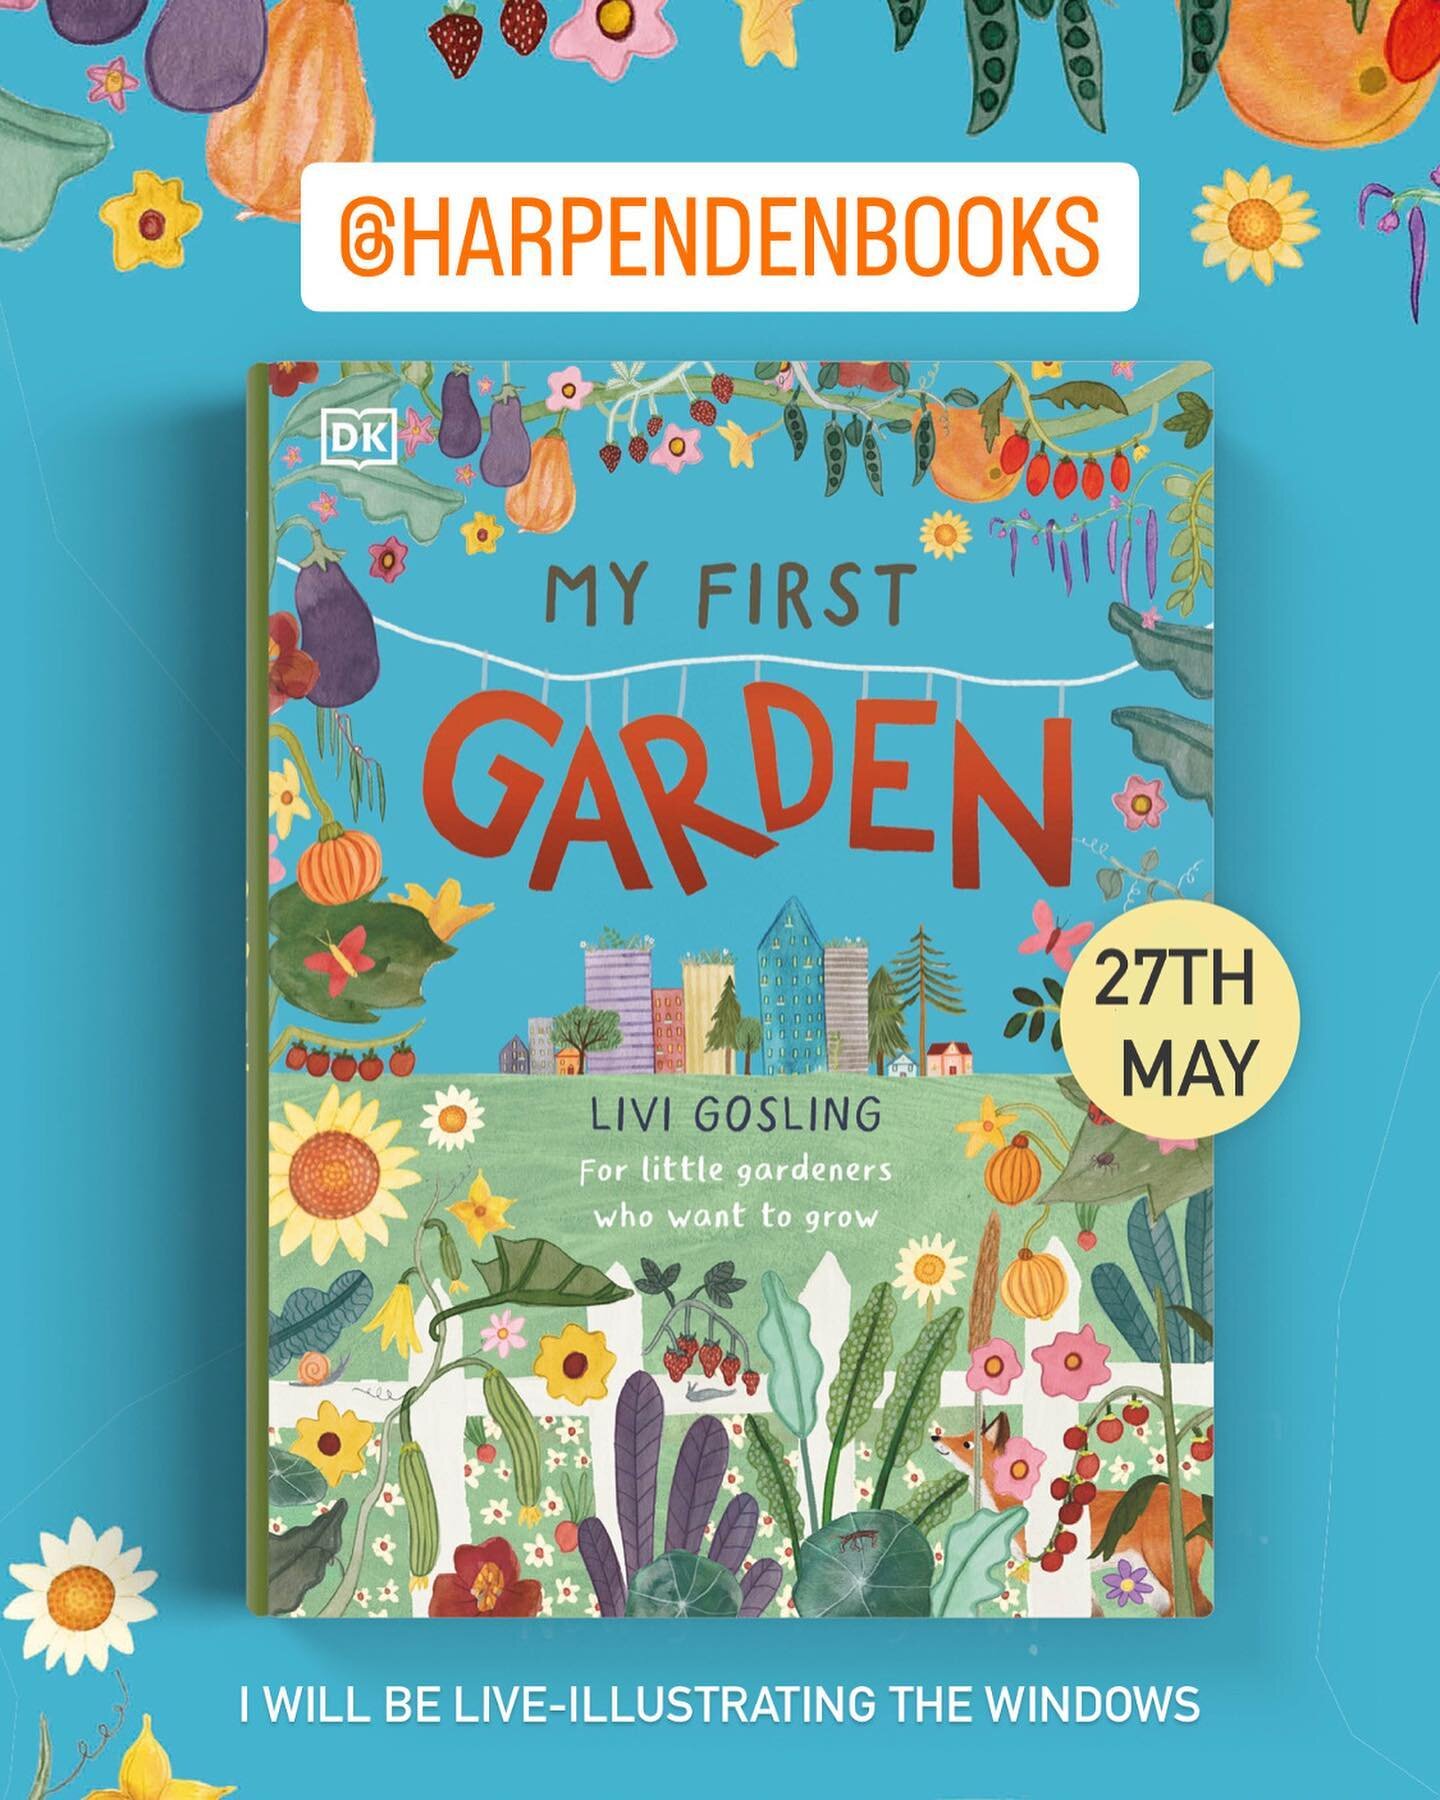 I have some exciting news! I will be illustrating the windows of my local bookshop @harpendenbooks on the 27th May from 11am

Pop by and say hi! Let&rsquo;s kick off half term and National Children&rsquo;s Gardening Week in style 🎨 

#MyFirstGarden 